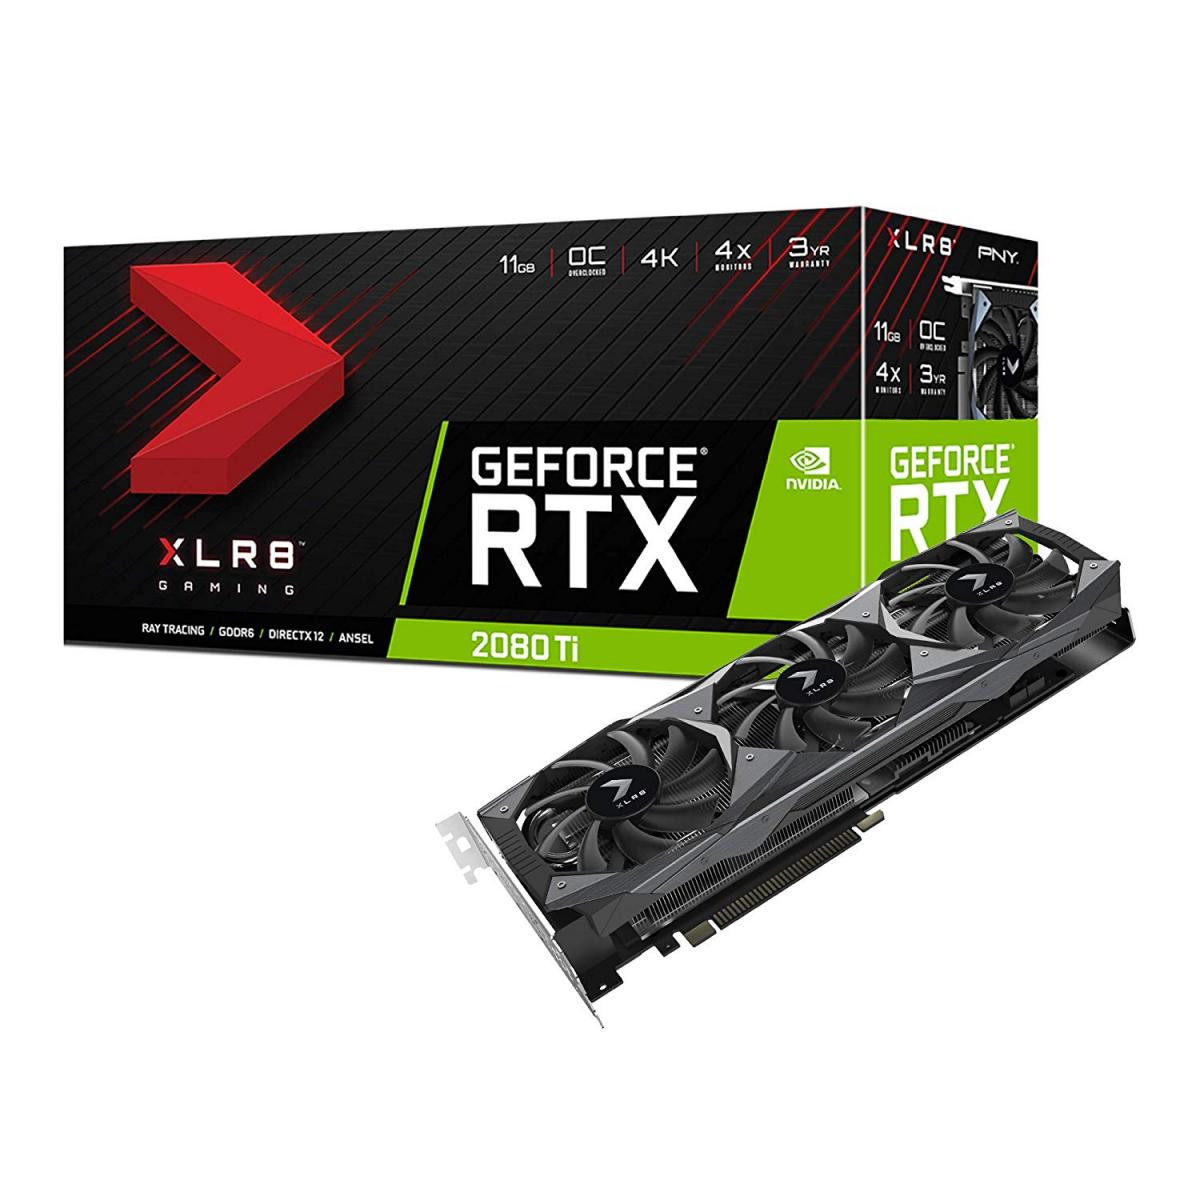 For sale ***LOWEST PRICE*** PNY - GeForce RTX 2080 Ti XLR8 Gaming Overclocked Edition